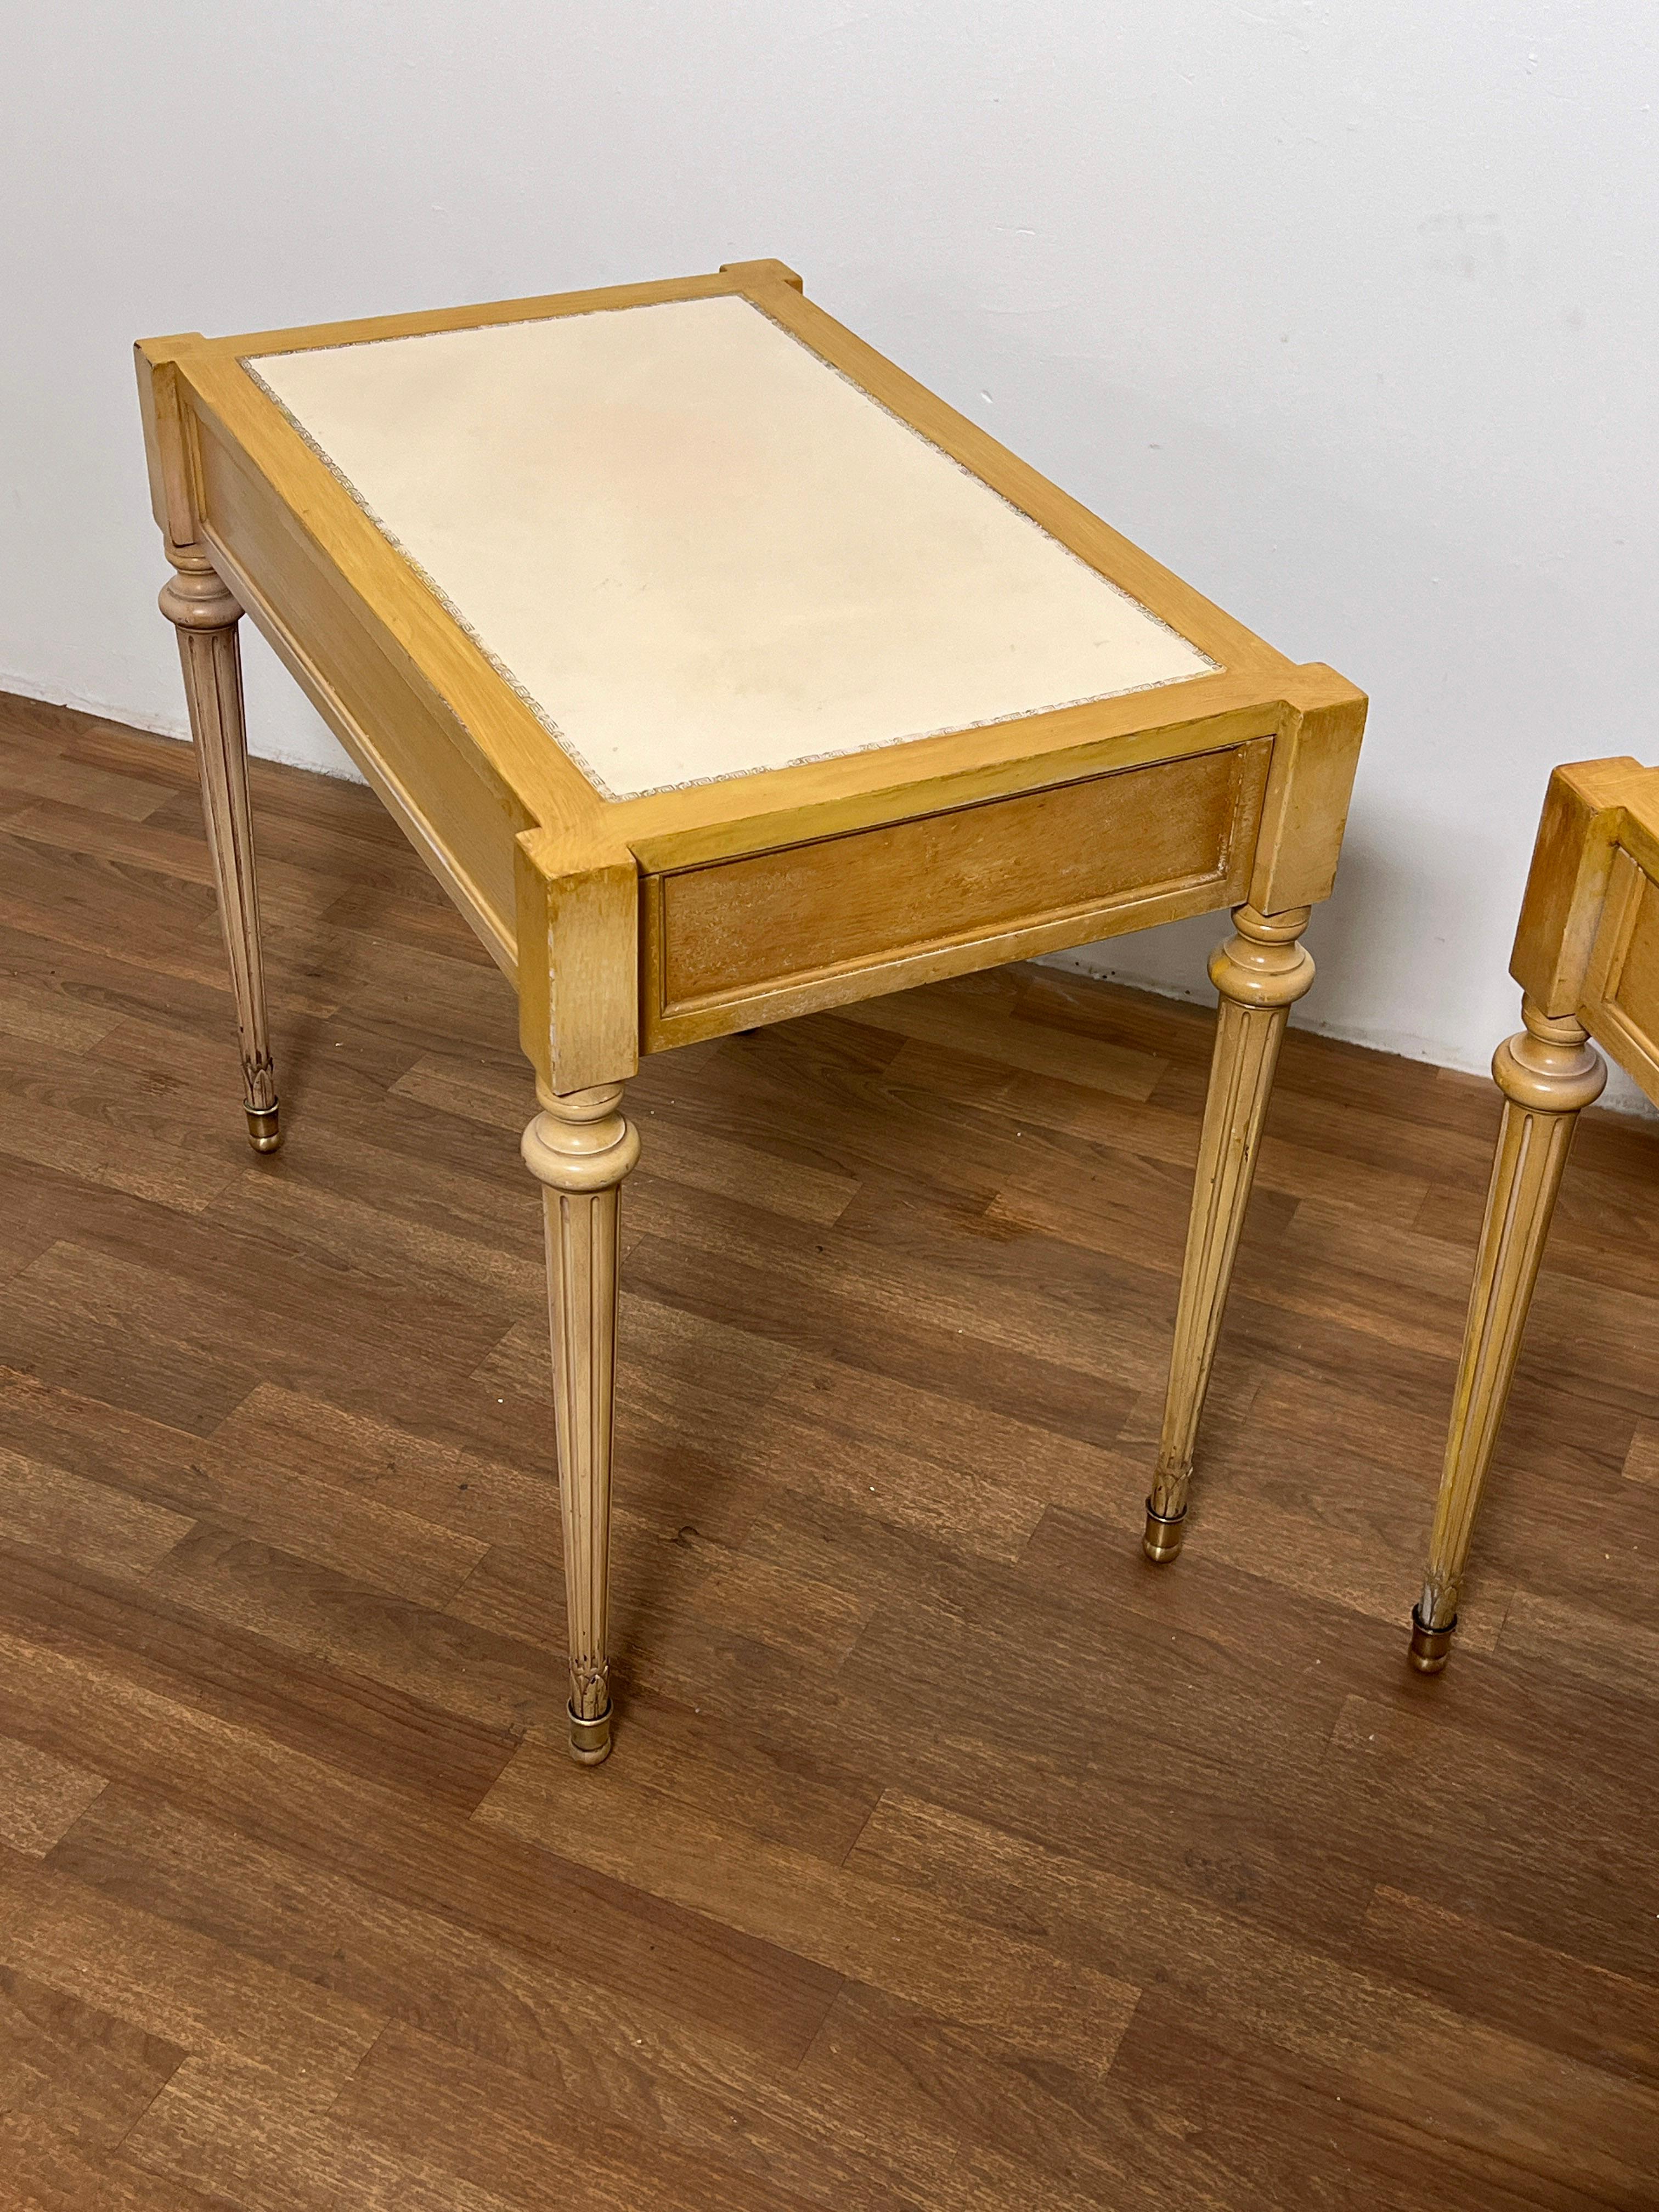 A pair of Louis XVI style lamp tables, each with a single drawer and white leather tops, by Adolfo Genovese for F & G Handmade Furniture of Cambridge, MA, circa 1950s.